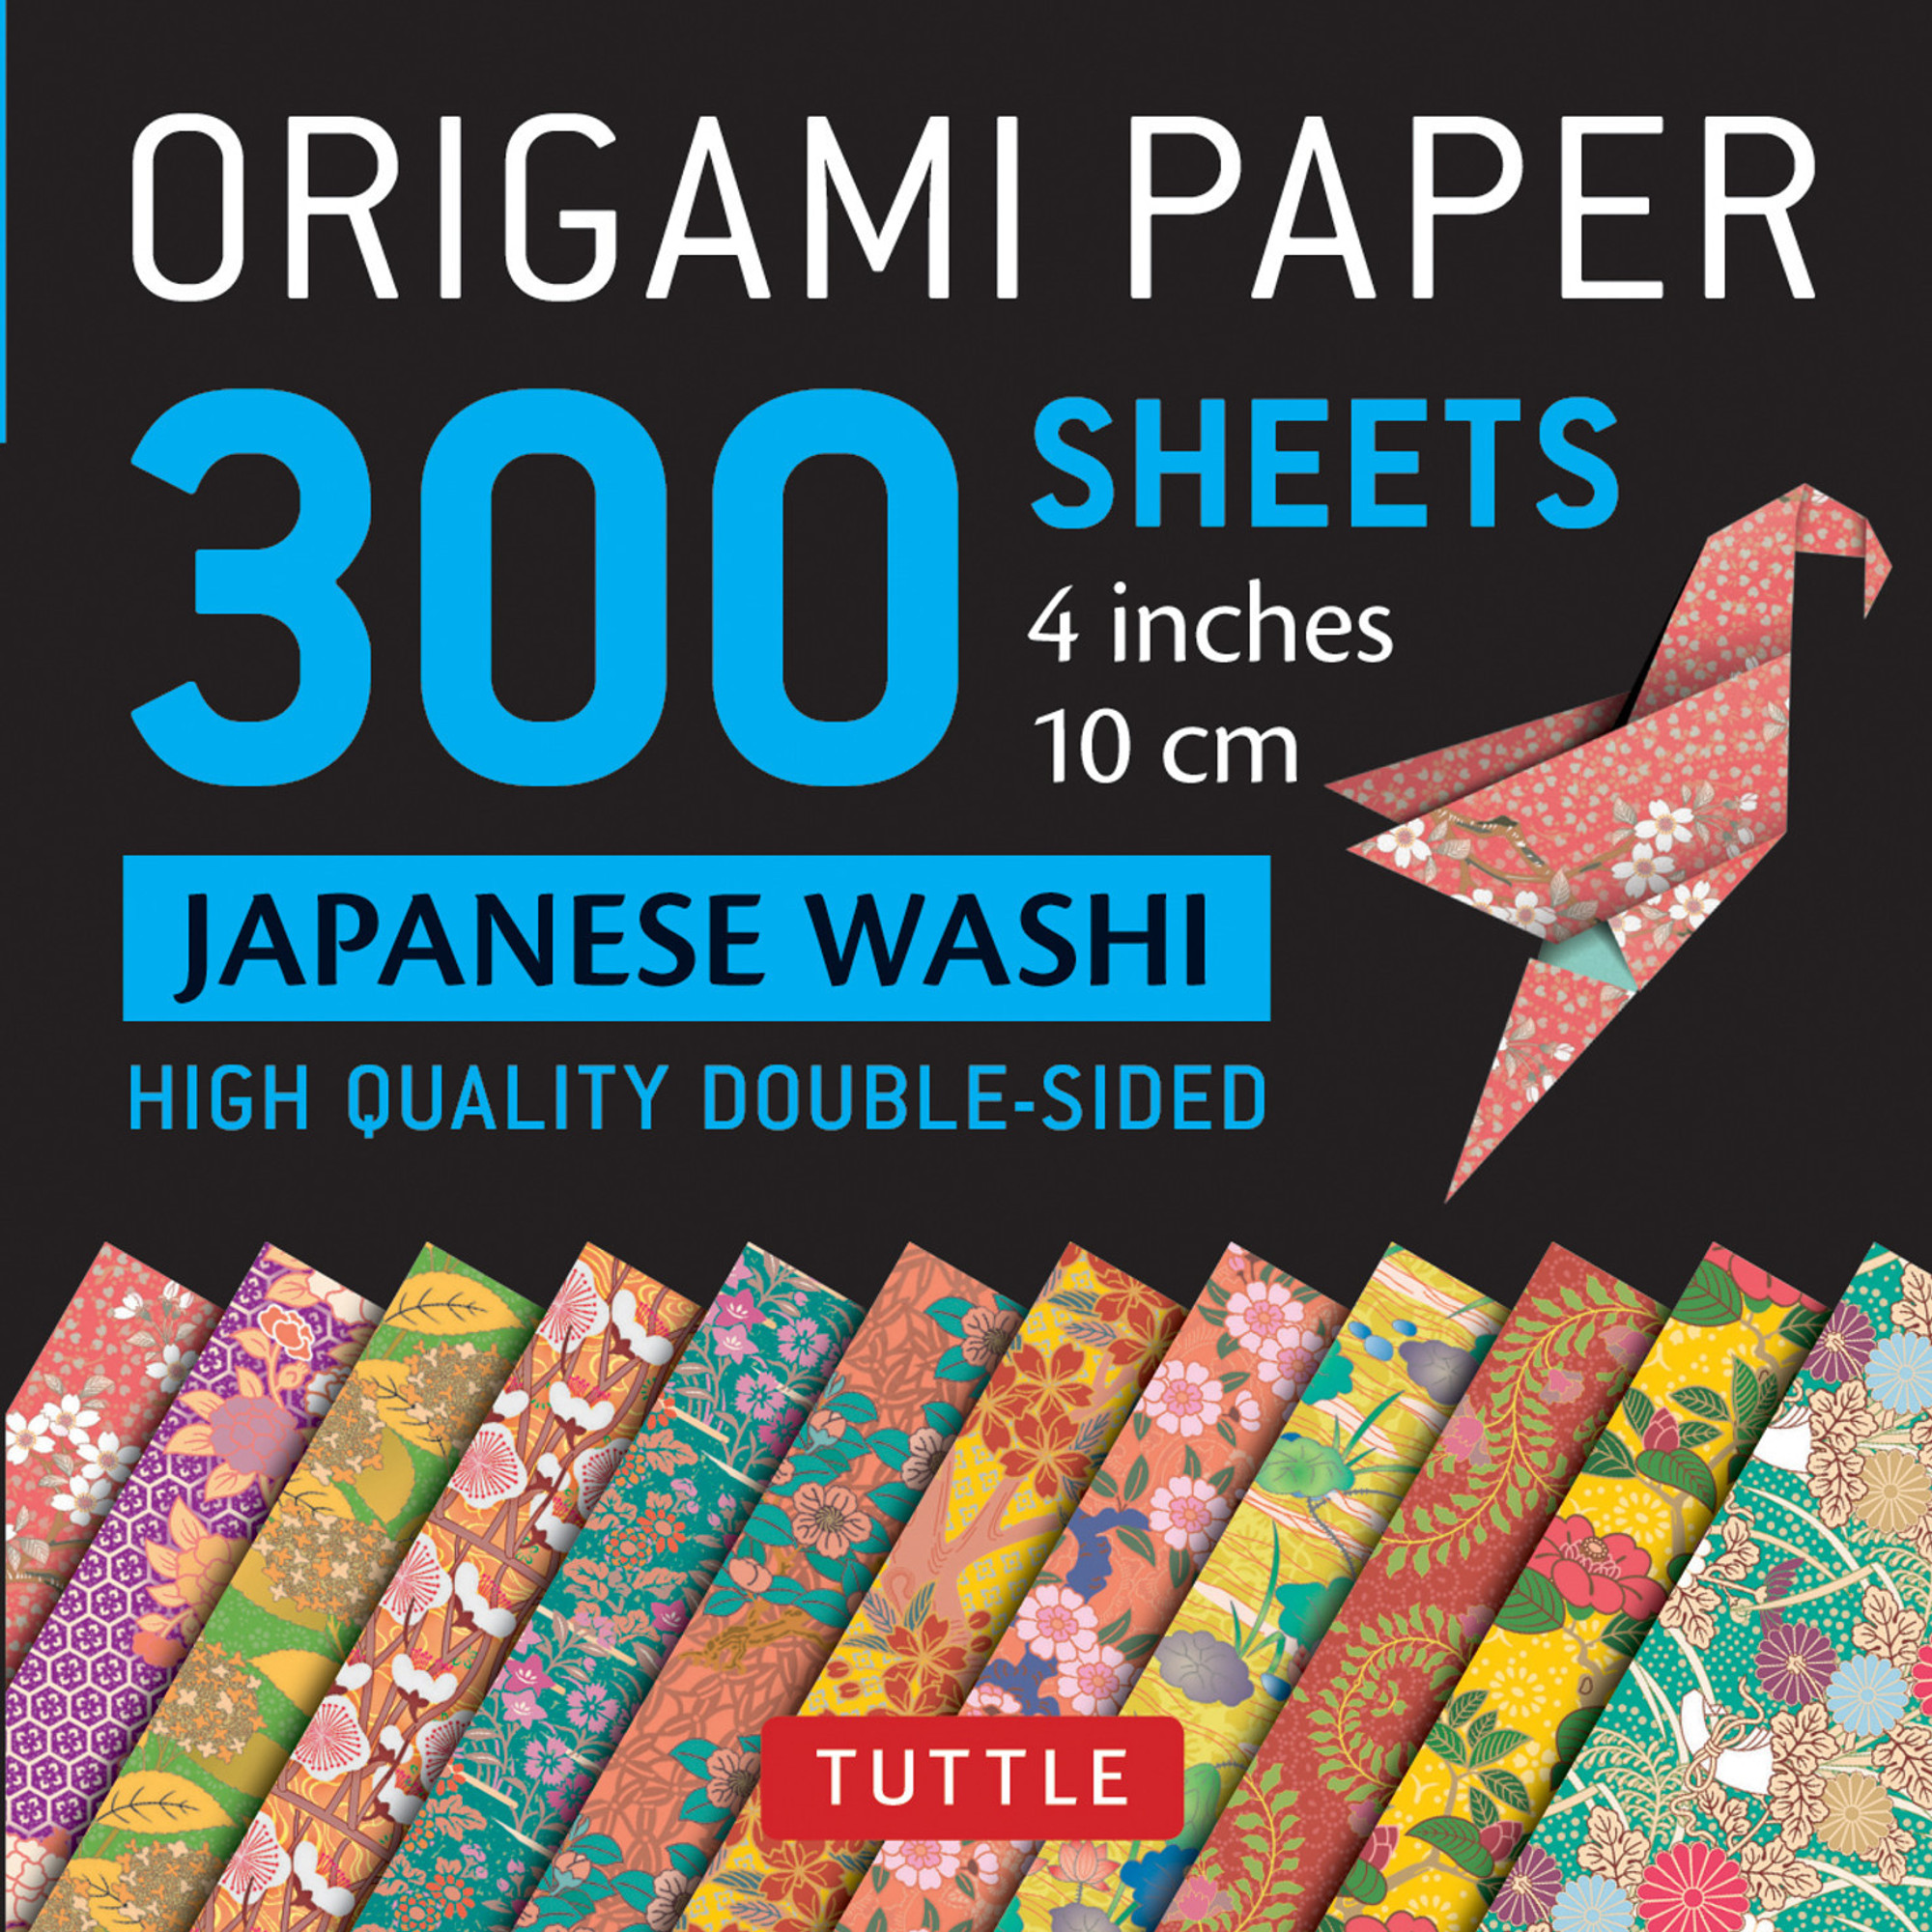 Origami Folding Papers Jumbo Pack: Japanese Designs (9780804847292